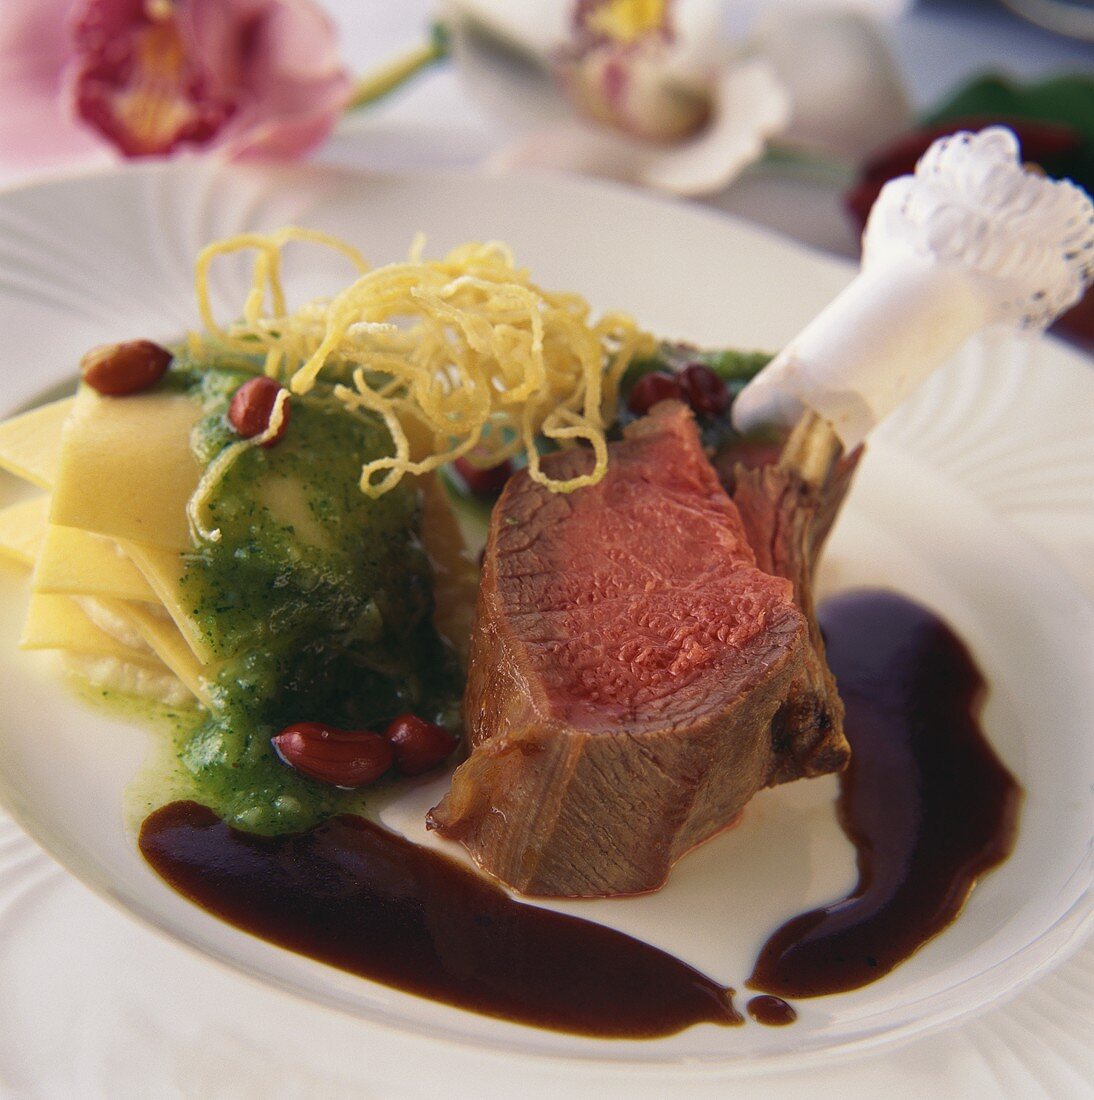 Lamb with wasabi pesto and parsnips on plate